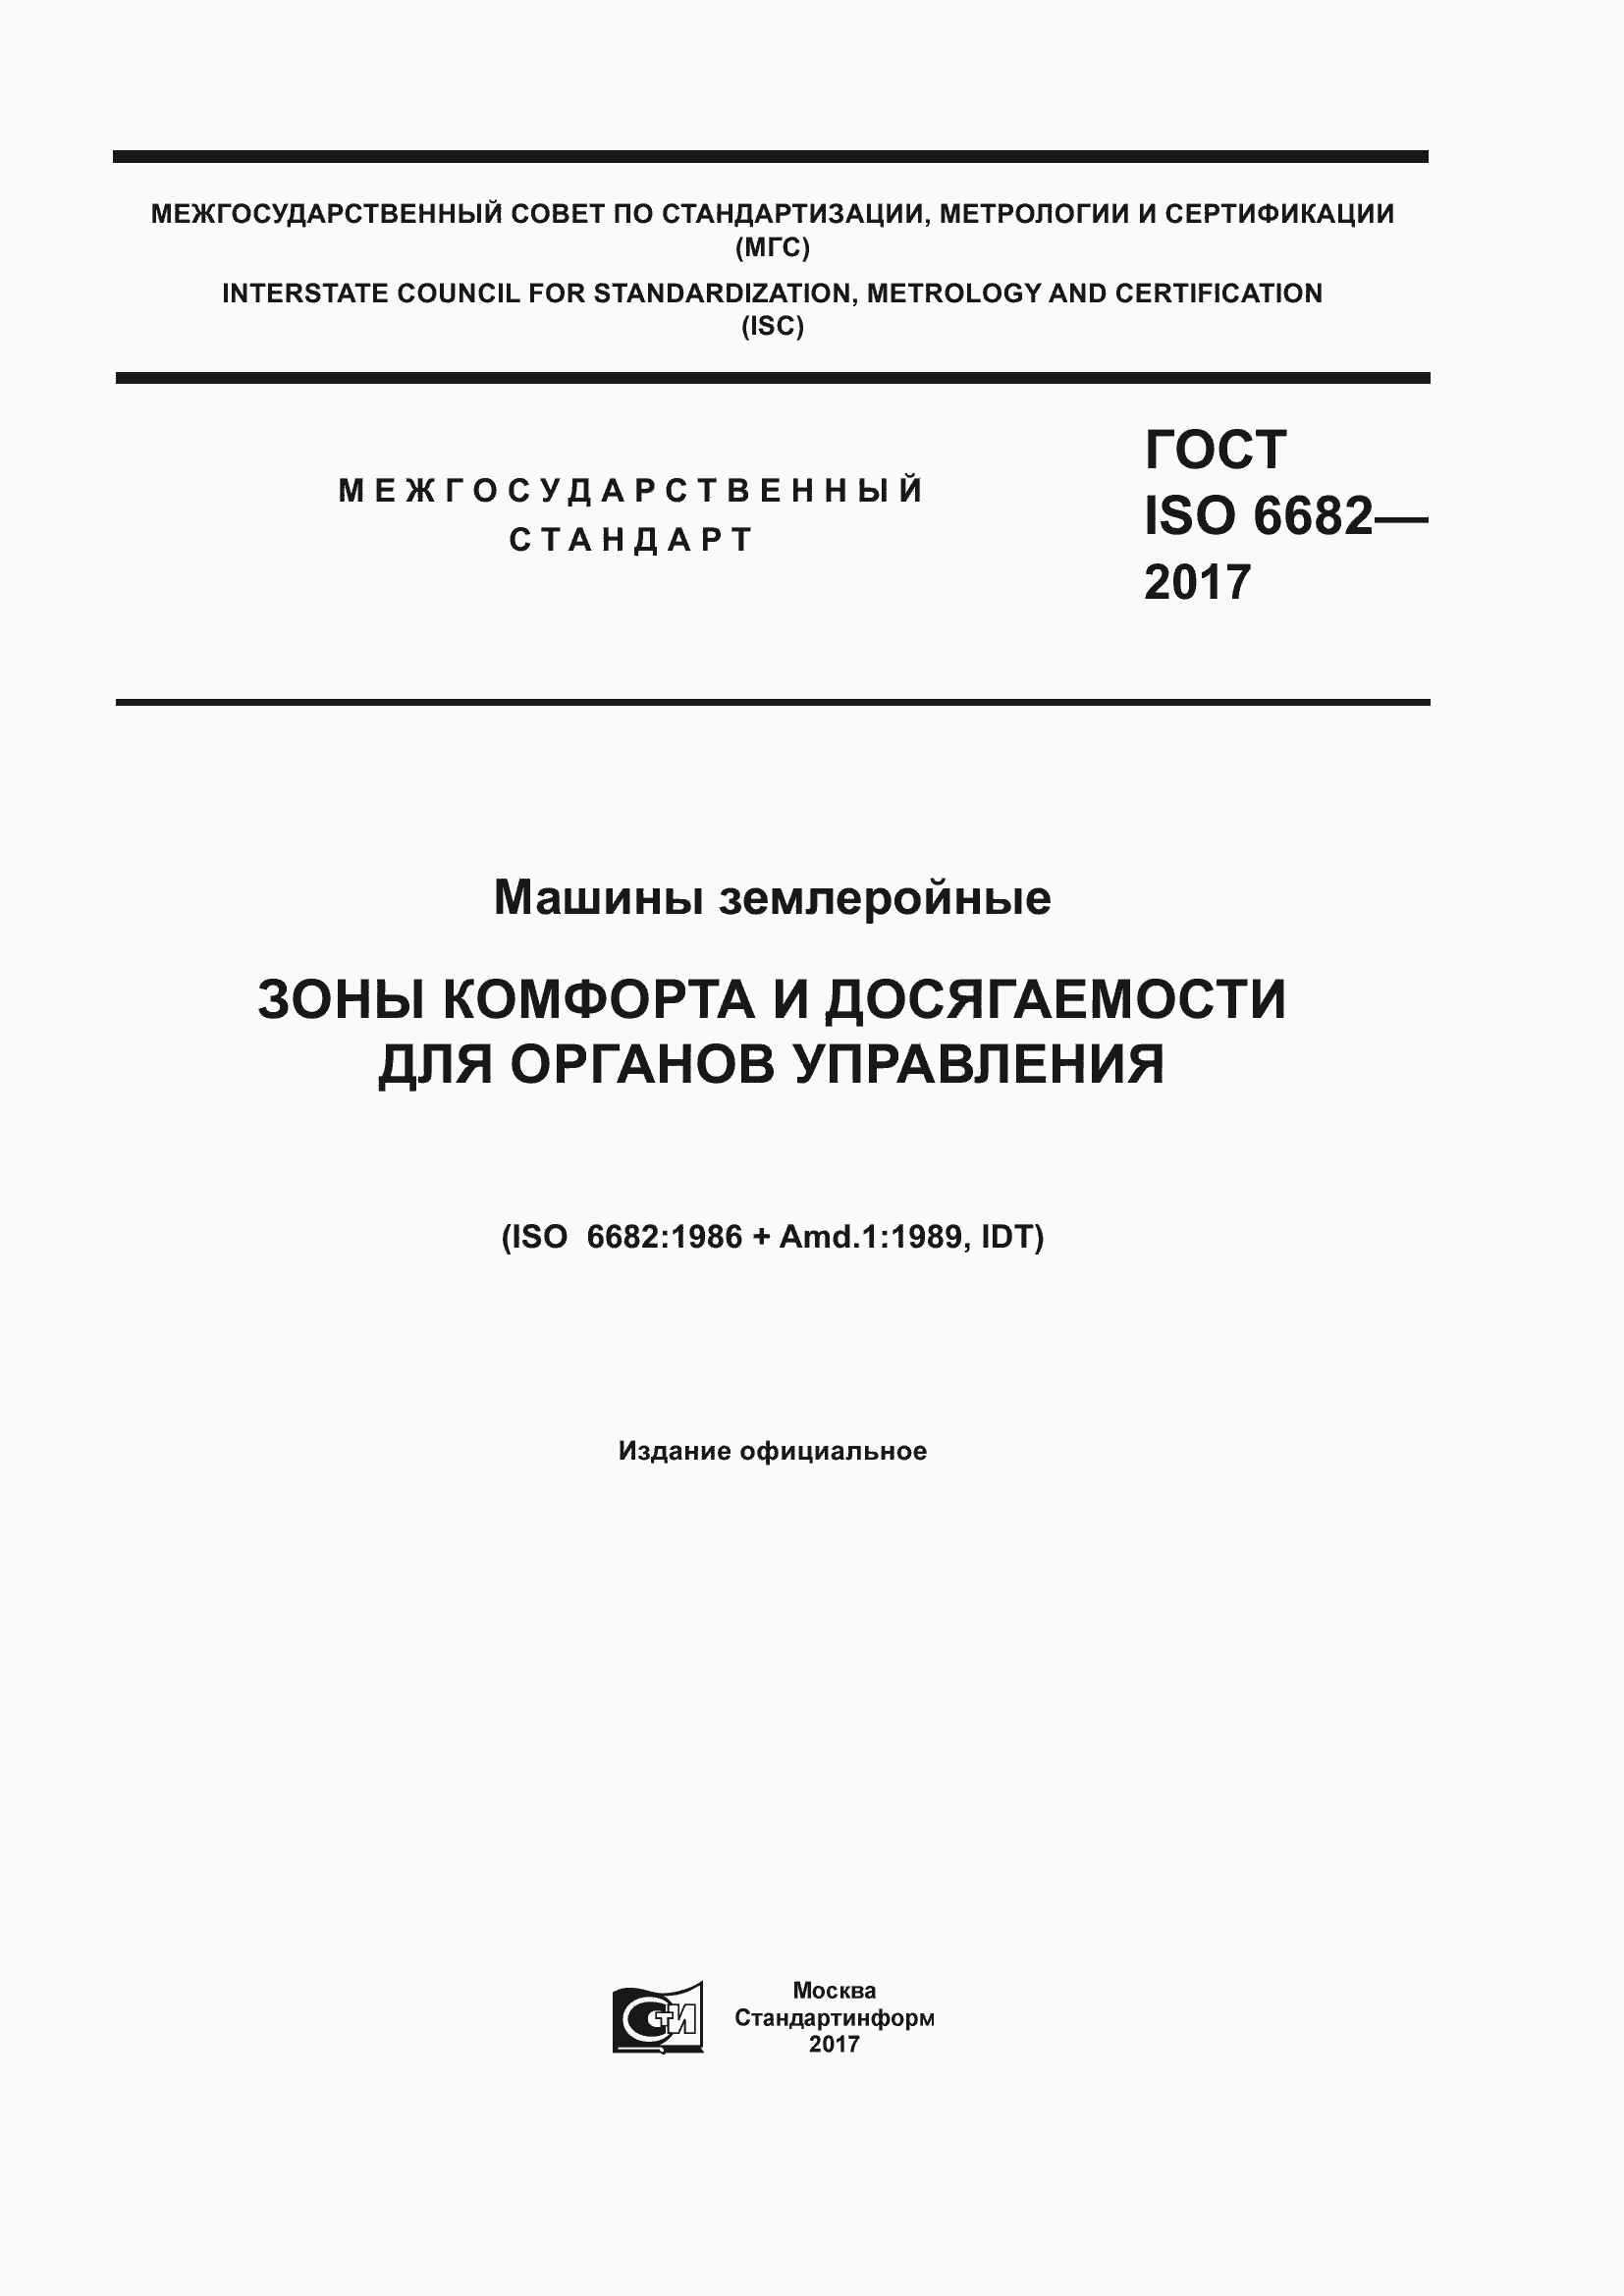  ISO 6682-2017.  1